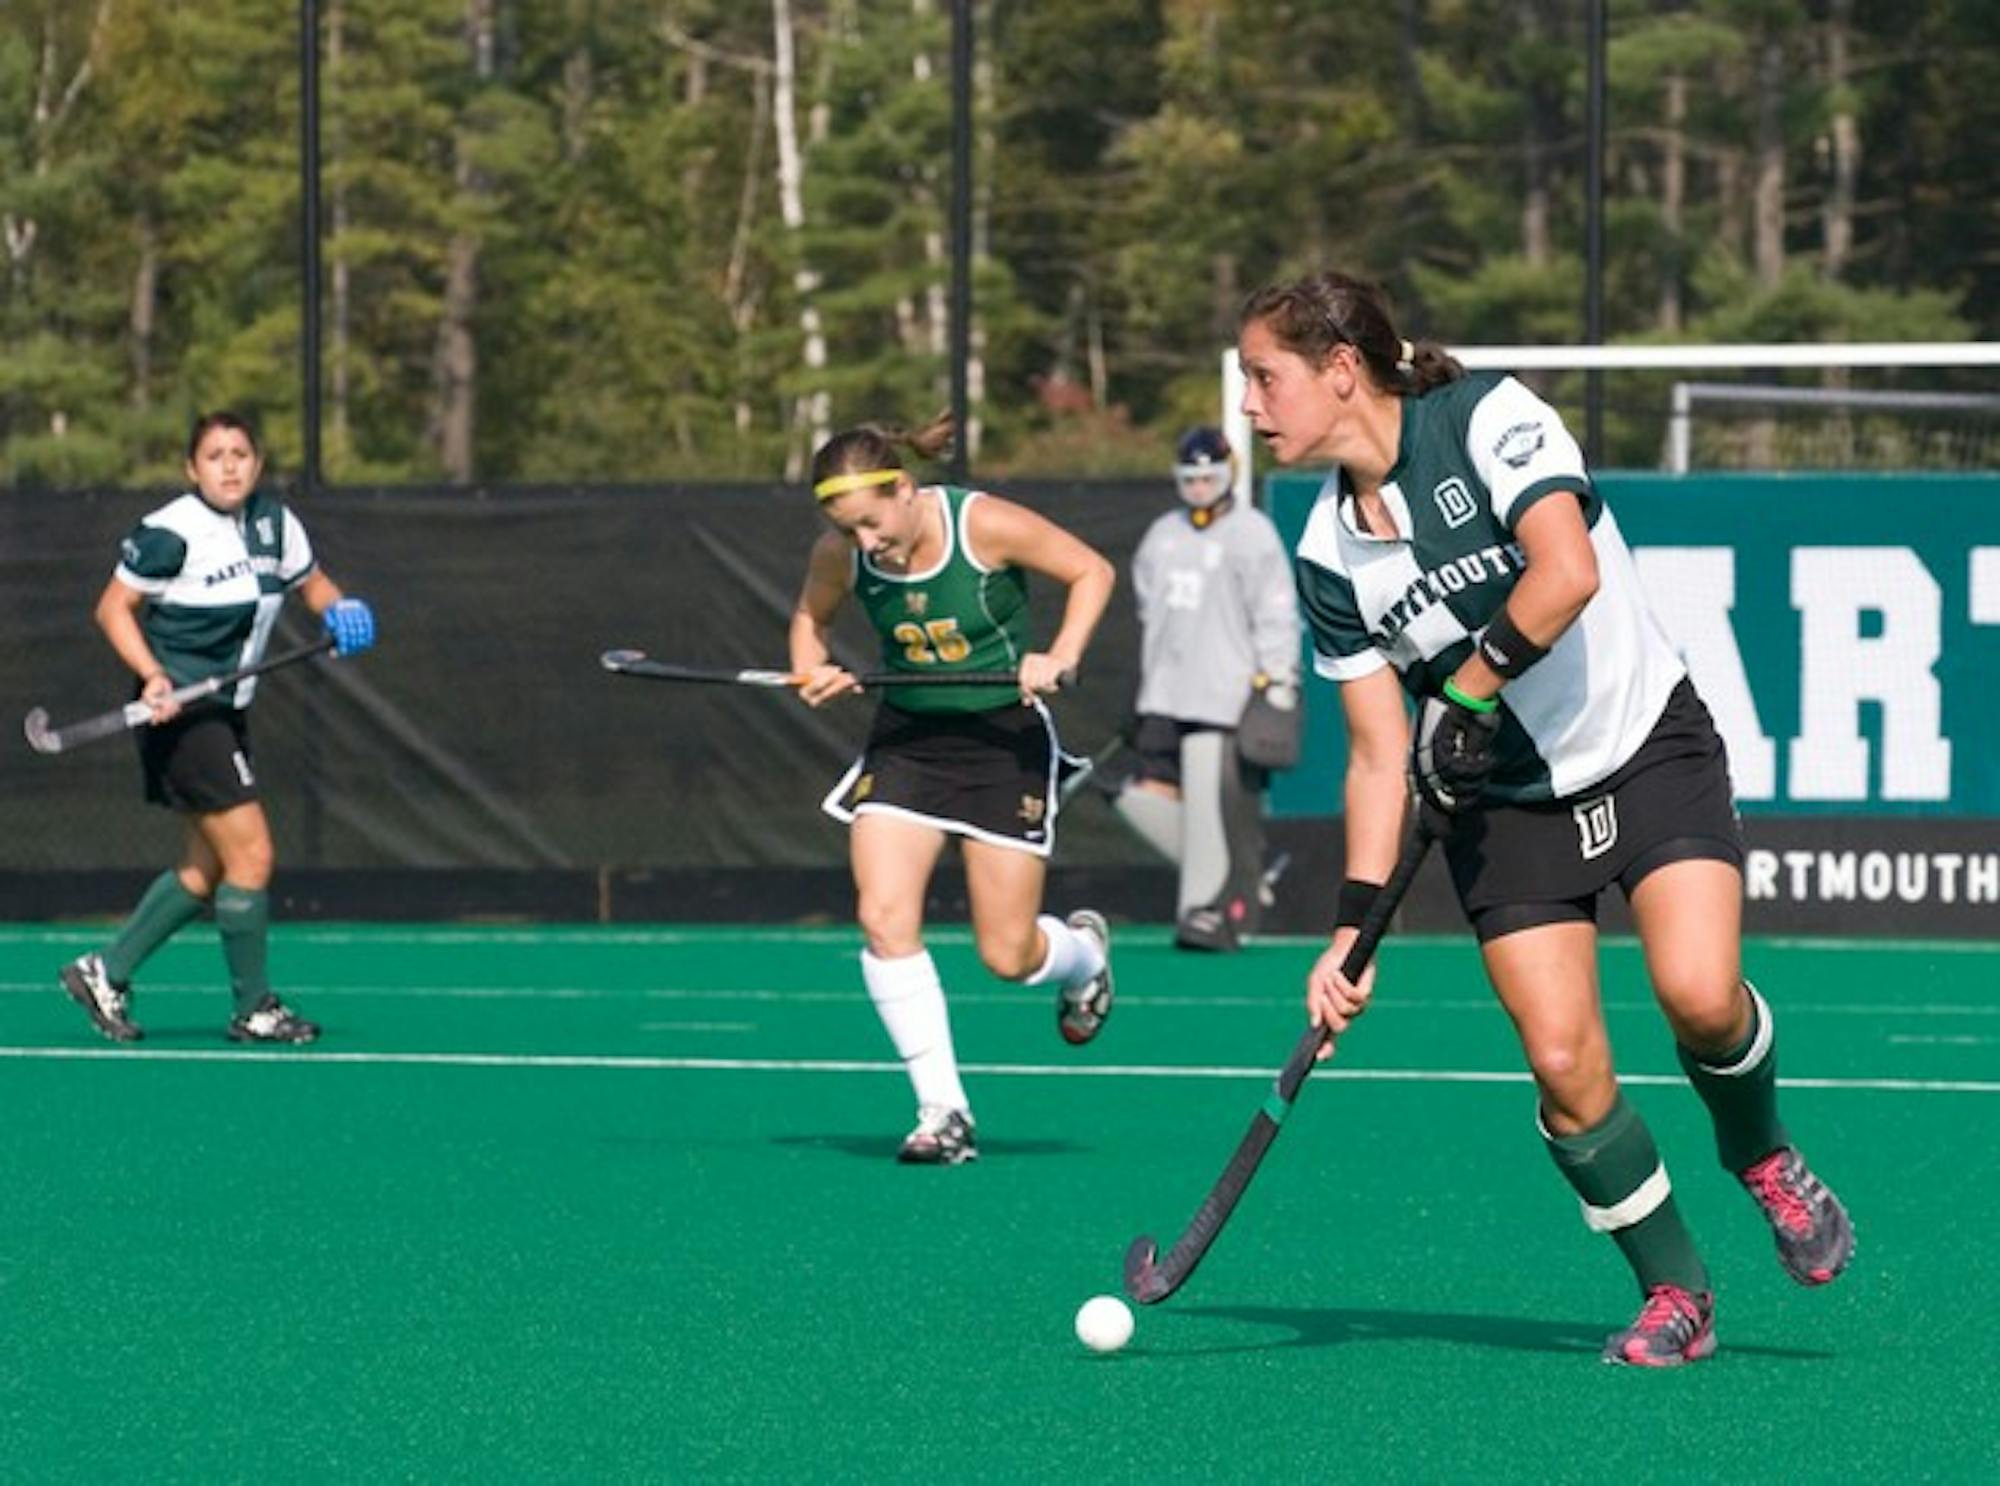 Kristen McCormick '09 set up Dartmouth's first goal against UVM to pick up her first assist of the season.